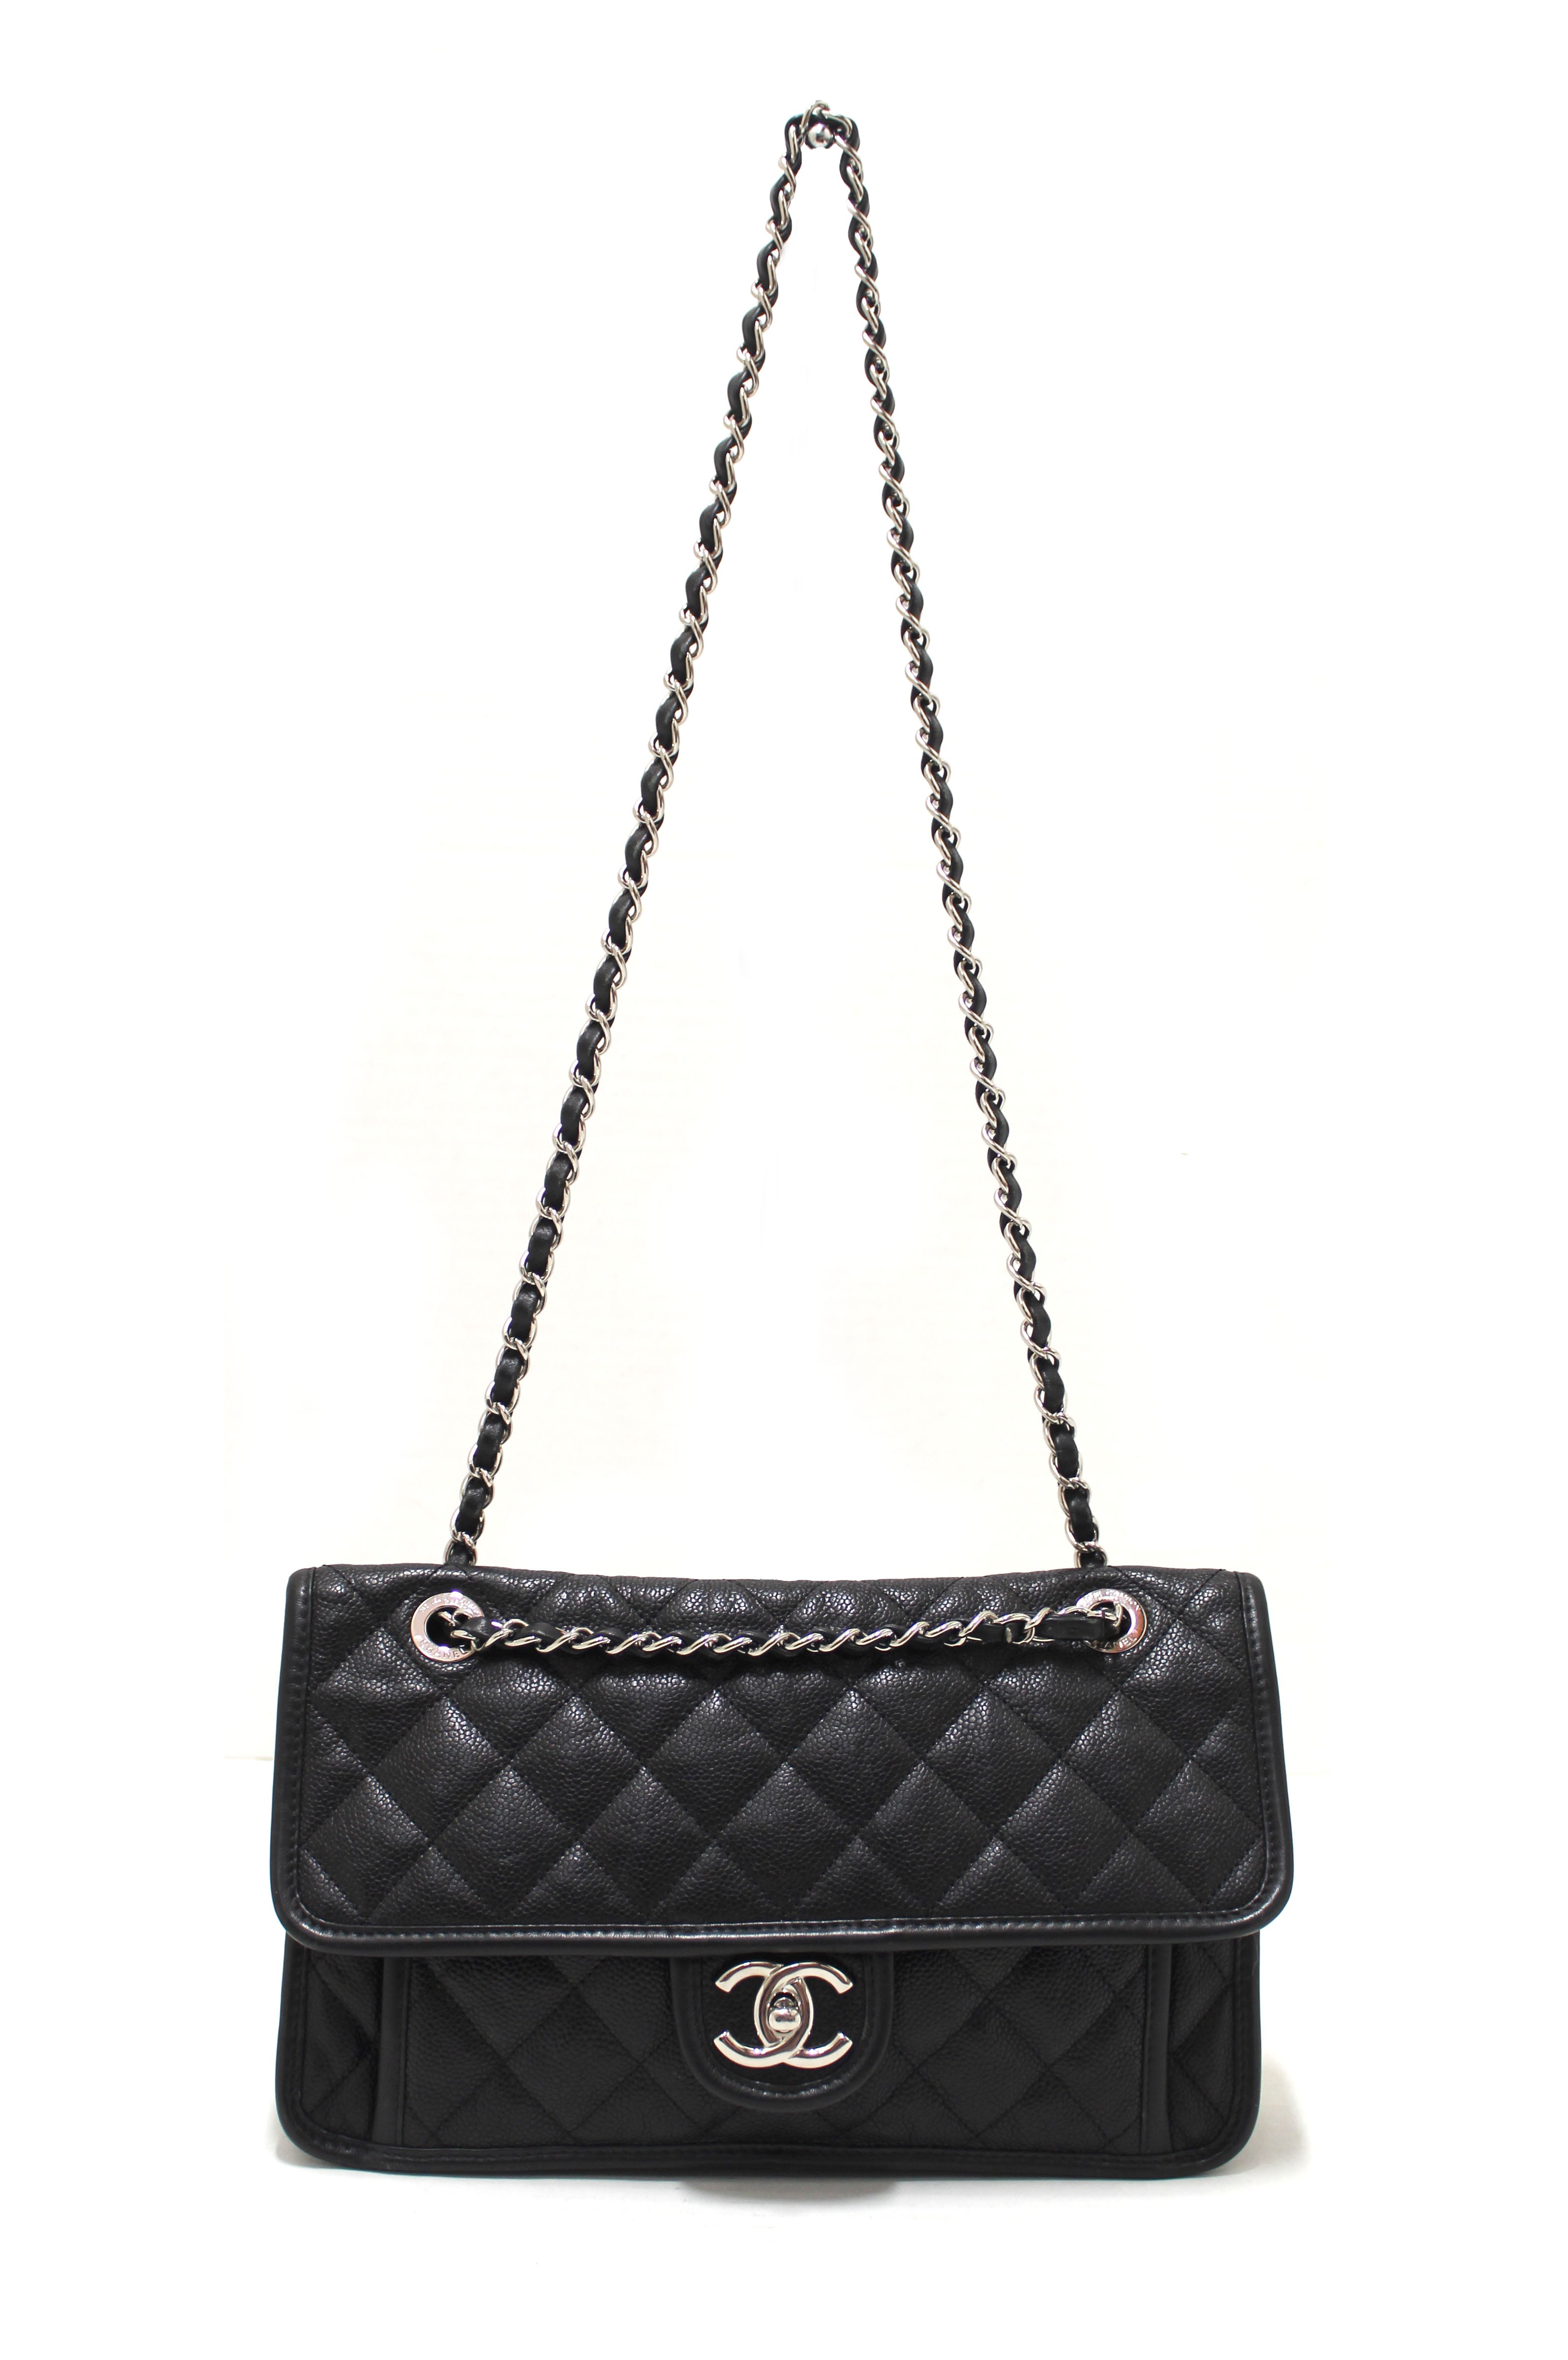 Chanel French Riviera Quilted Caviar Leather Hobo Bag